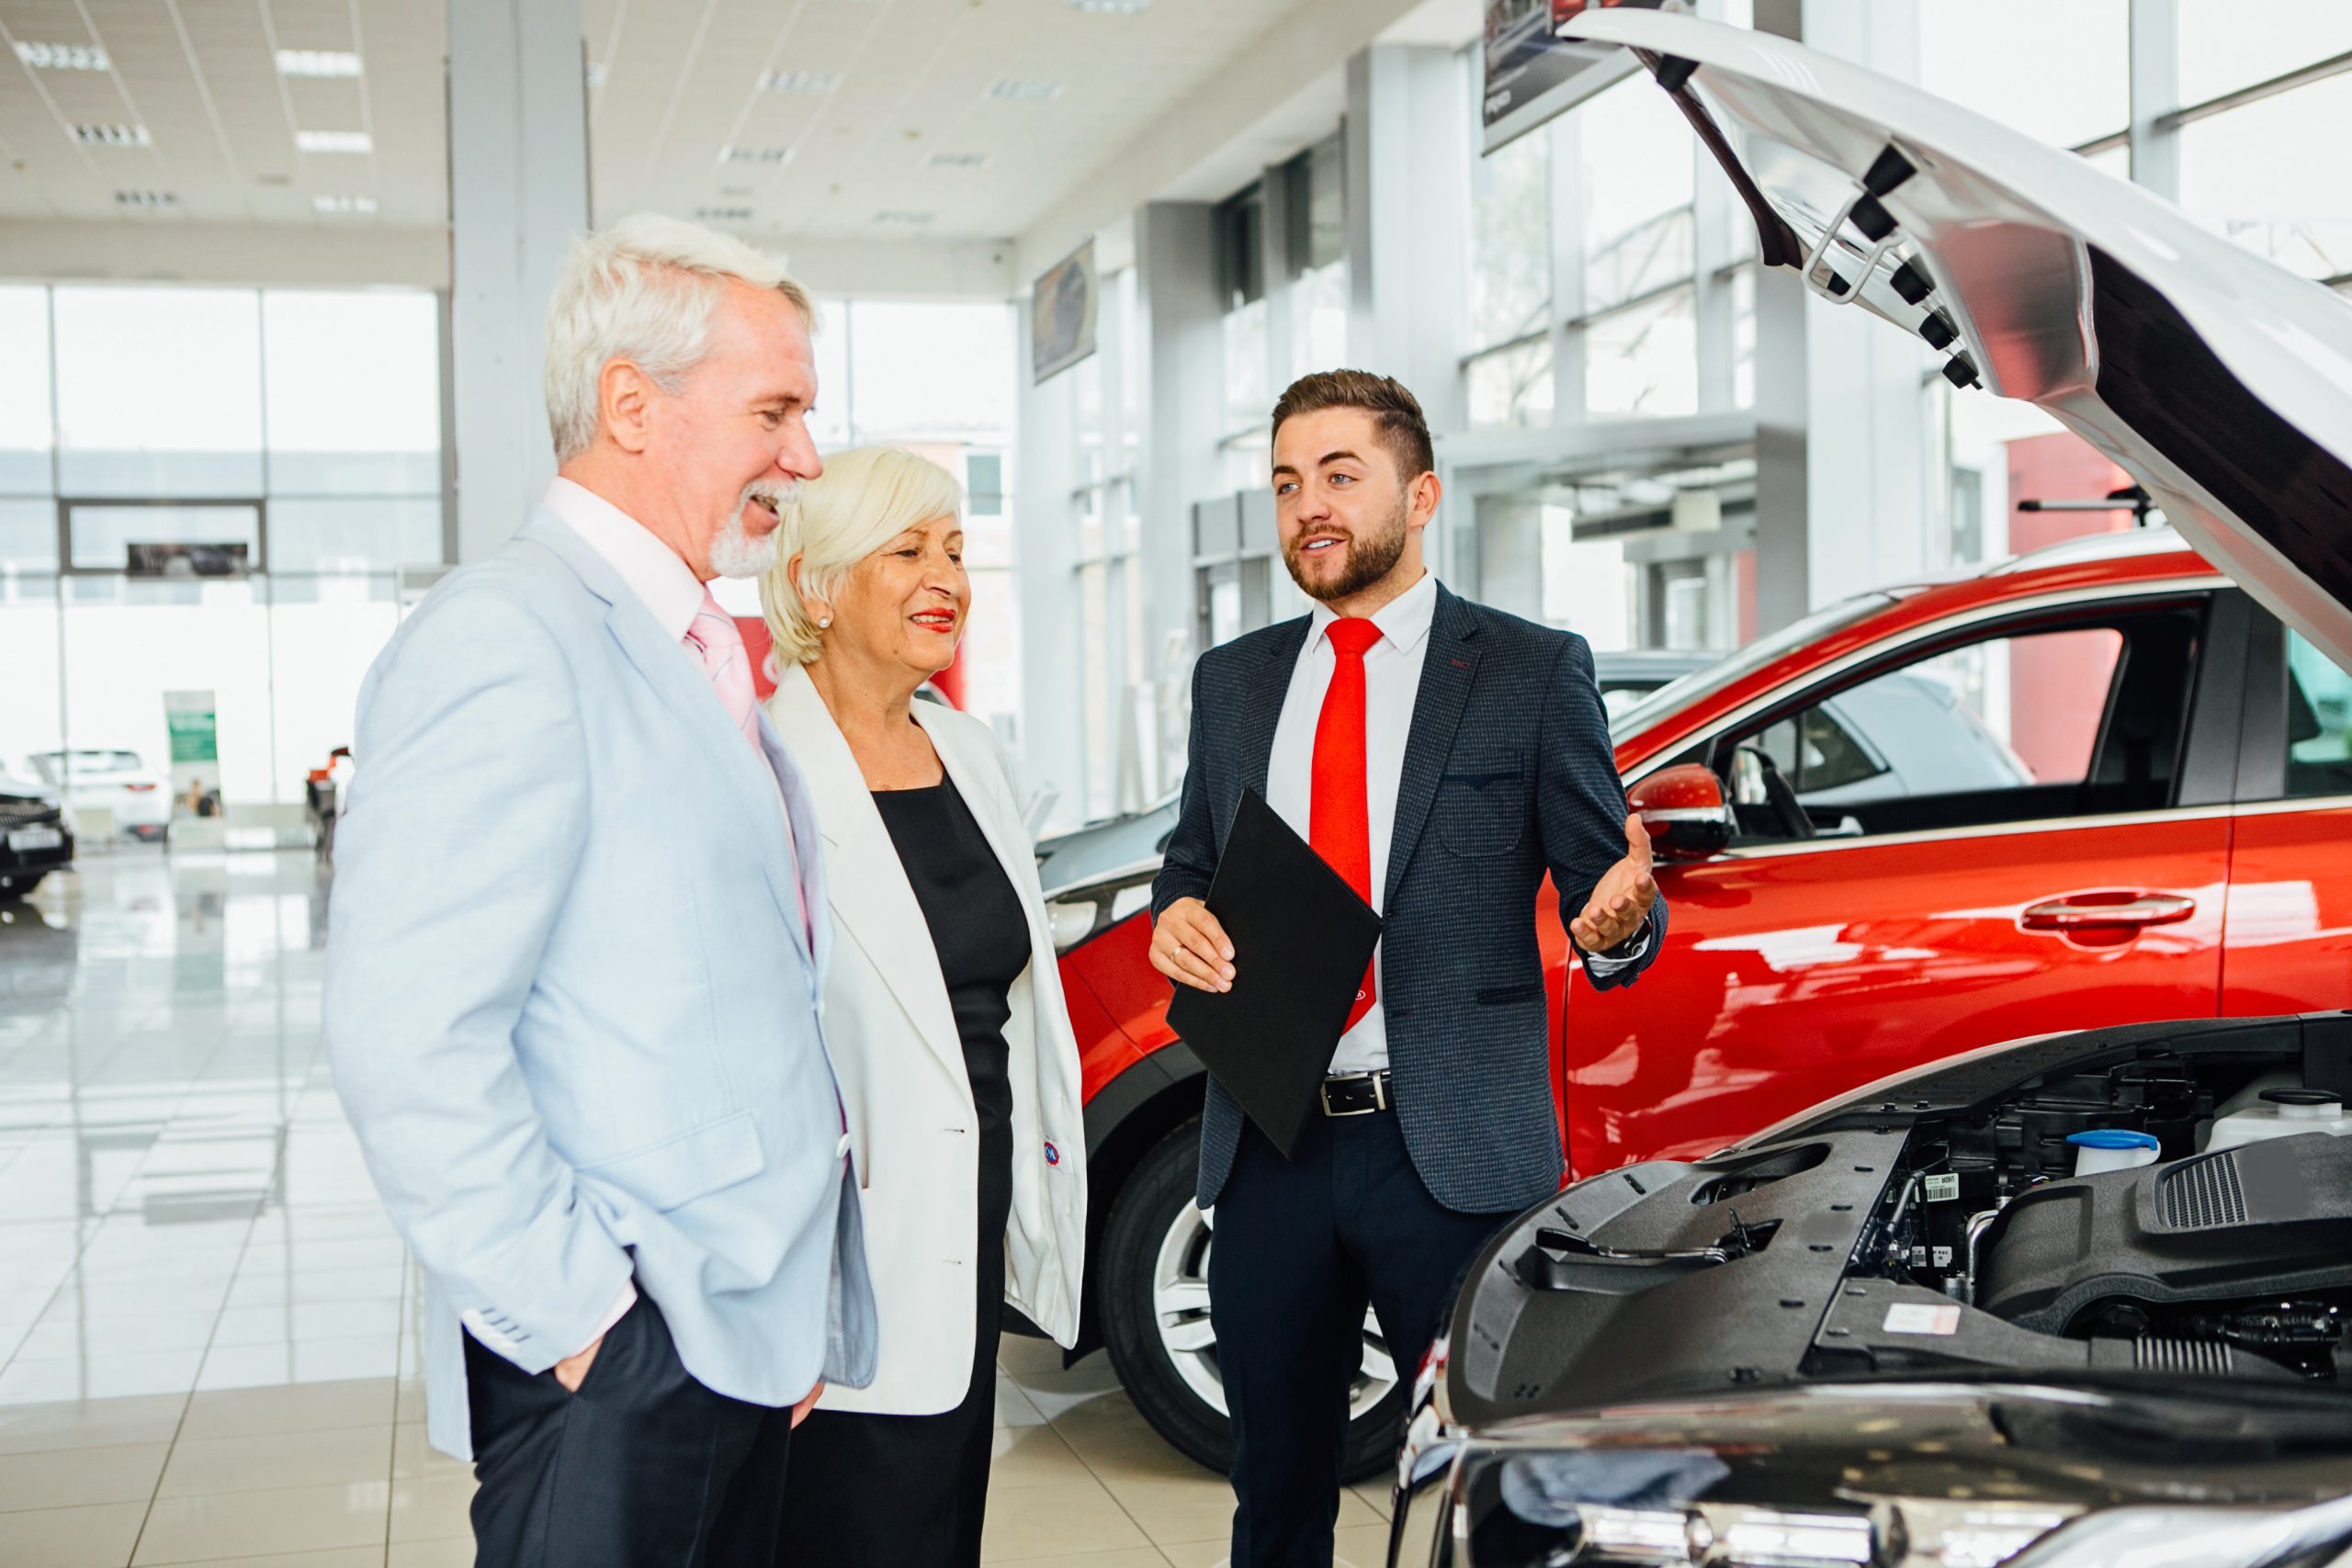 How to Attract More Car Owners in a Workshop?